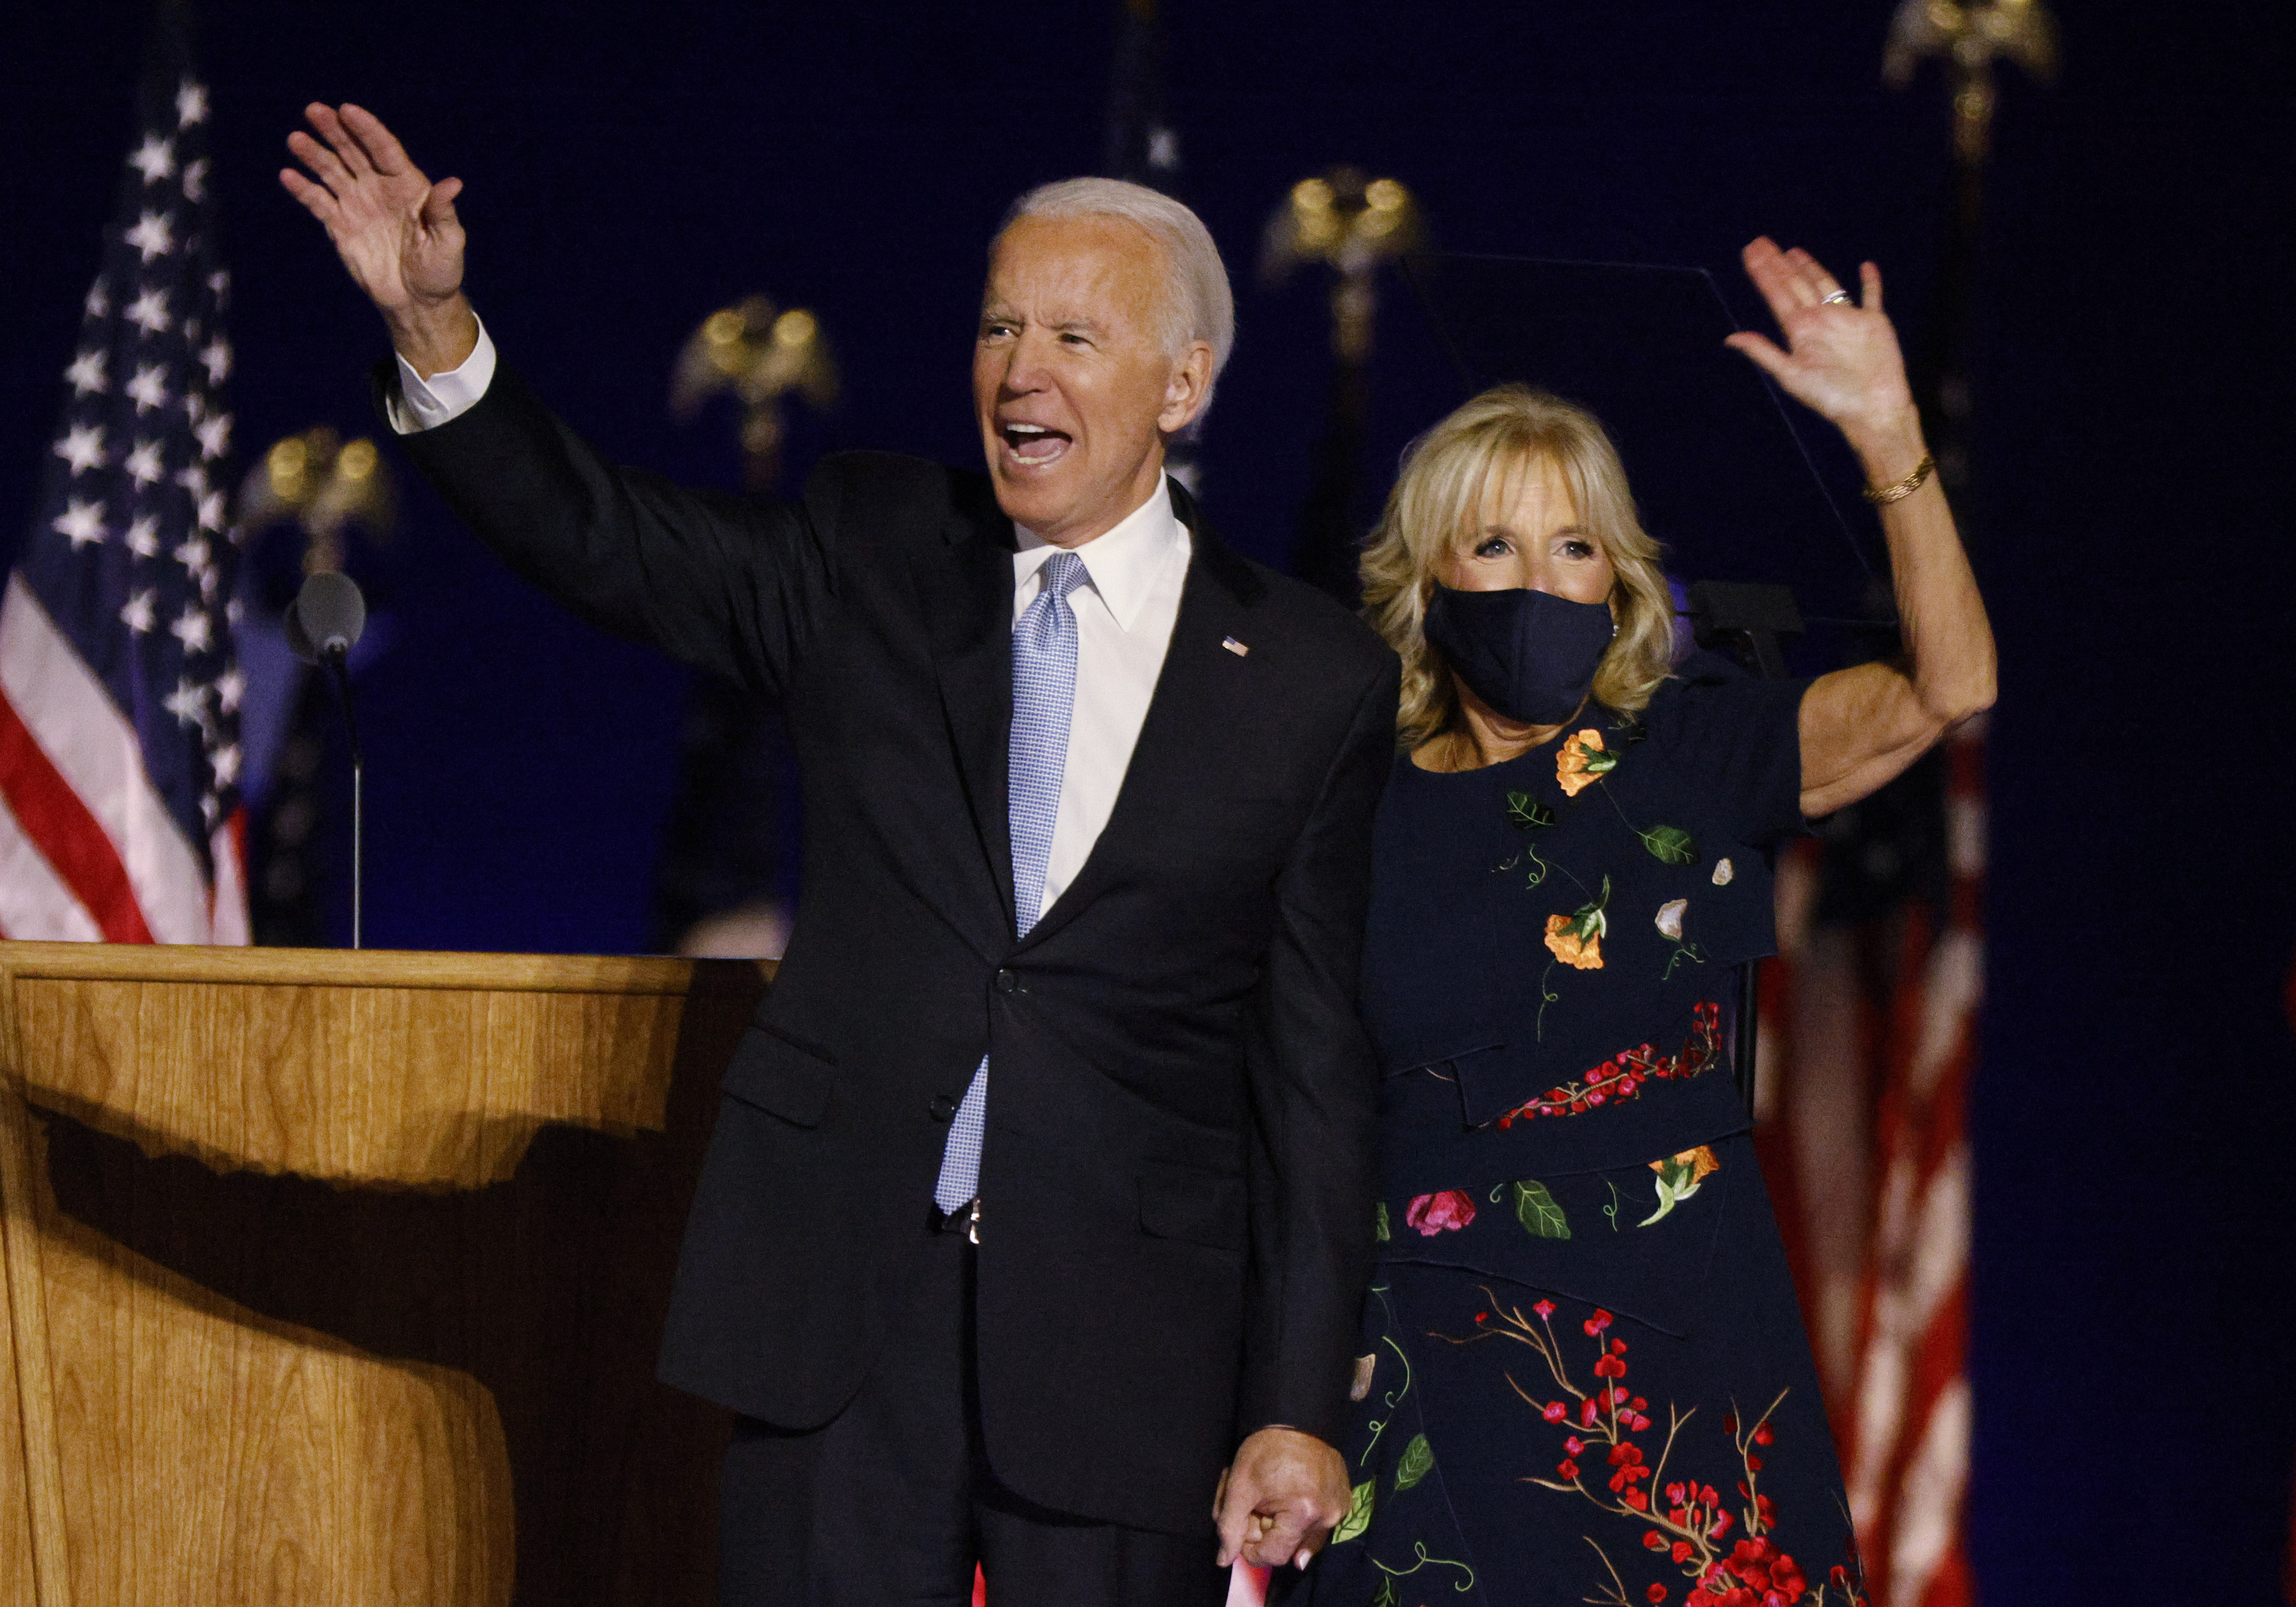 Democratic 2020 U.S. presidential nominee Joe Biden and his wife Jill wave to the crowd at his election rally in Wilmington